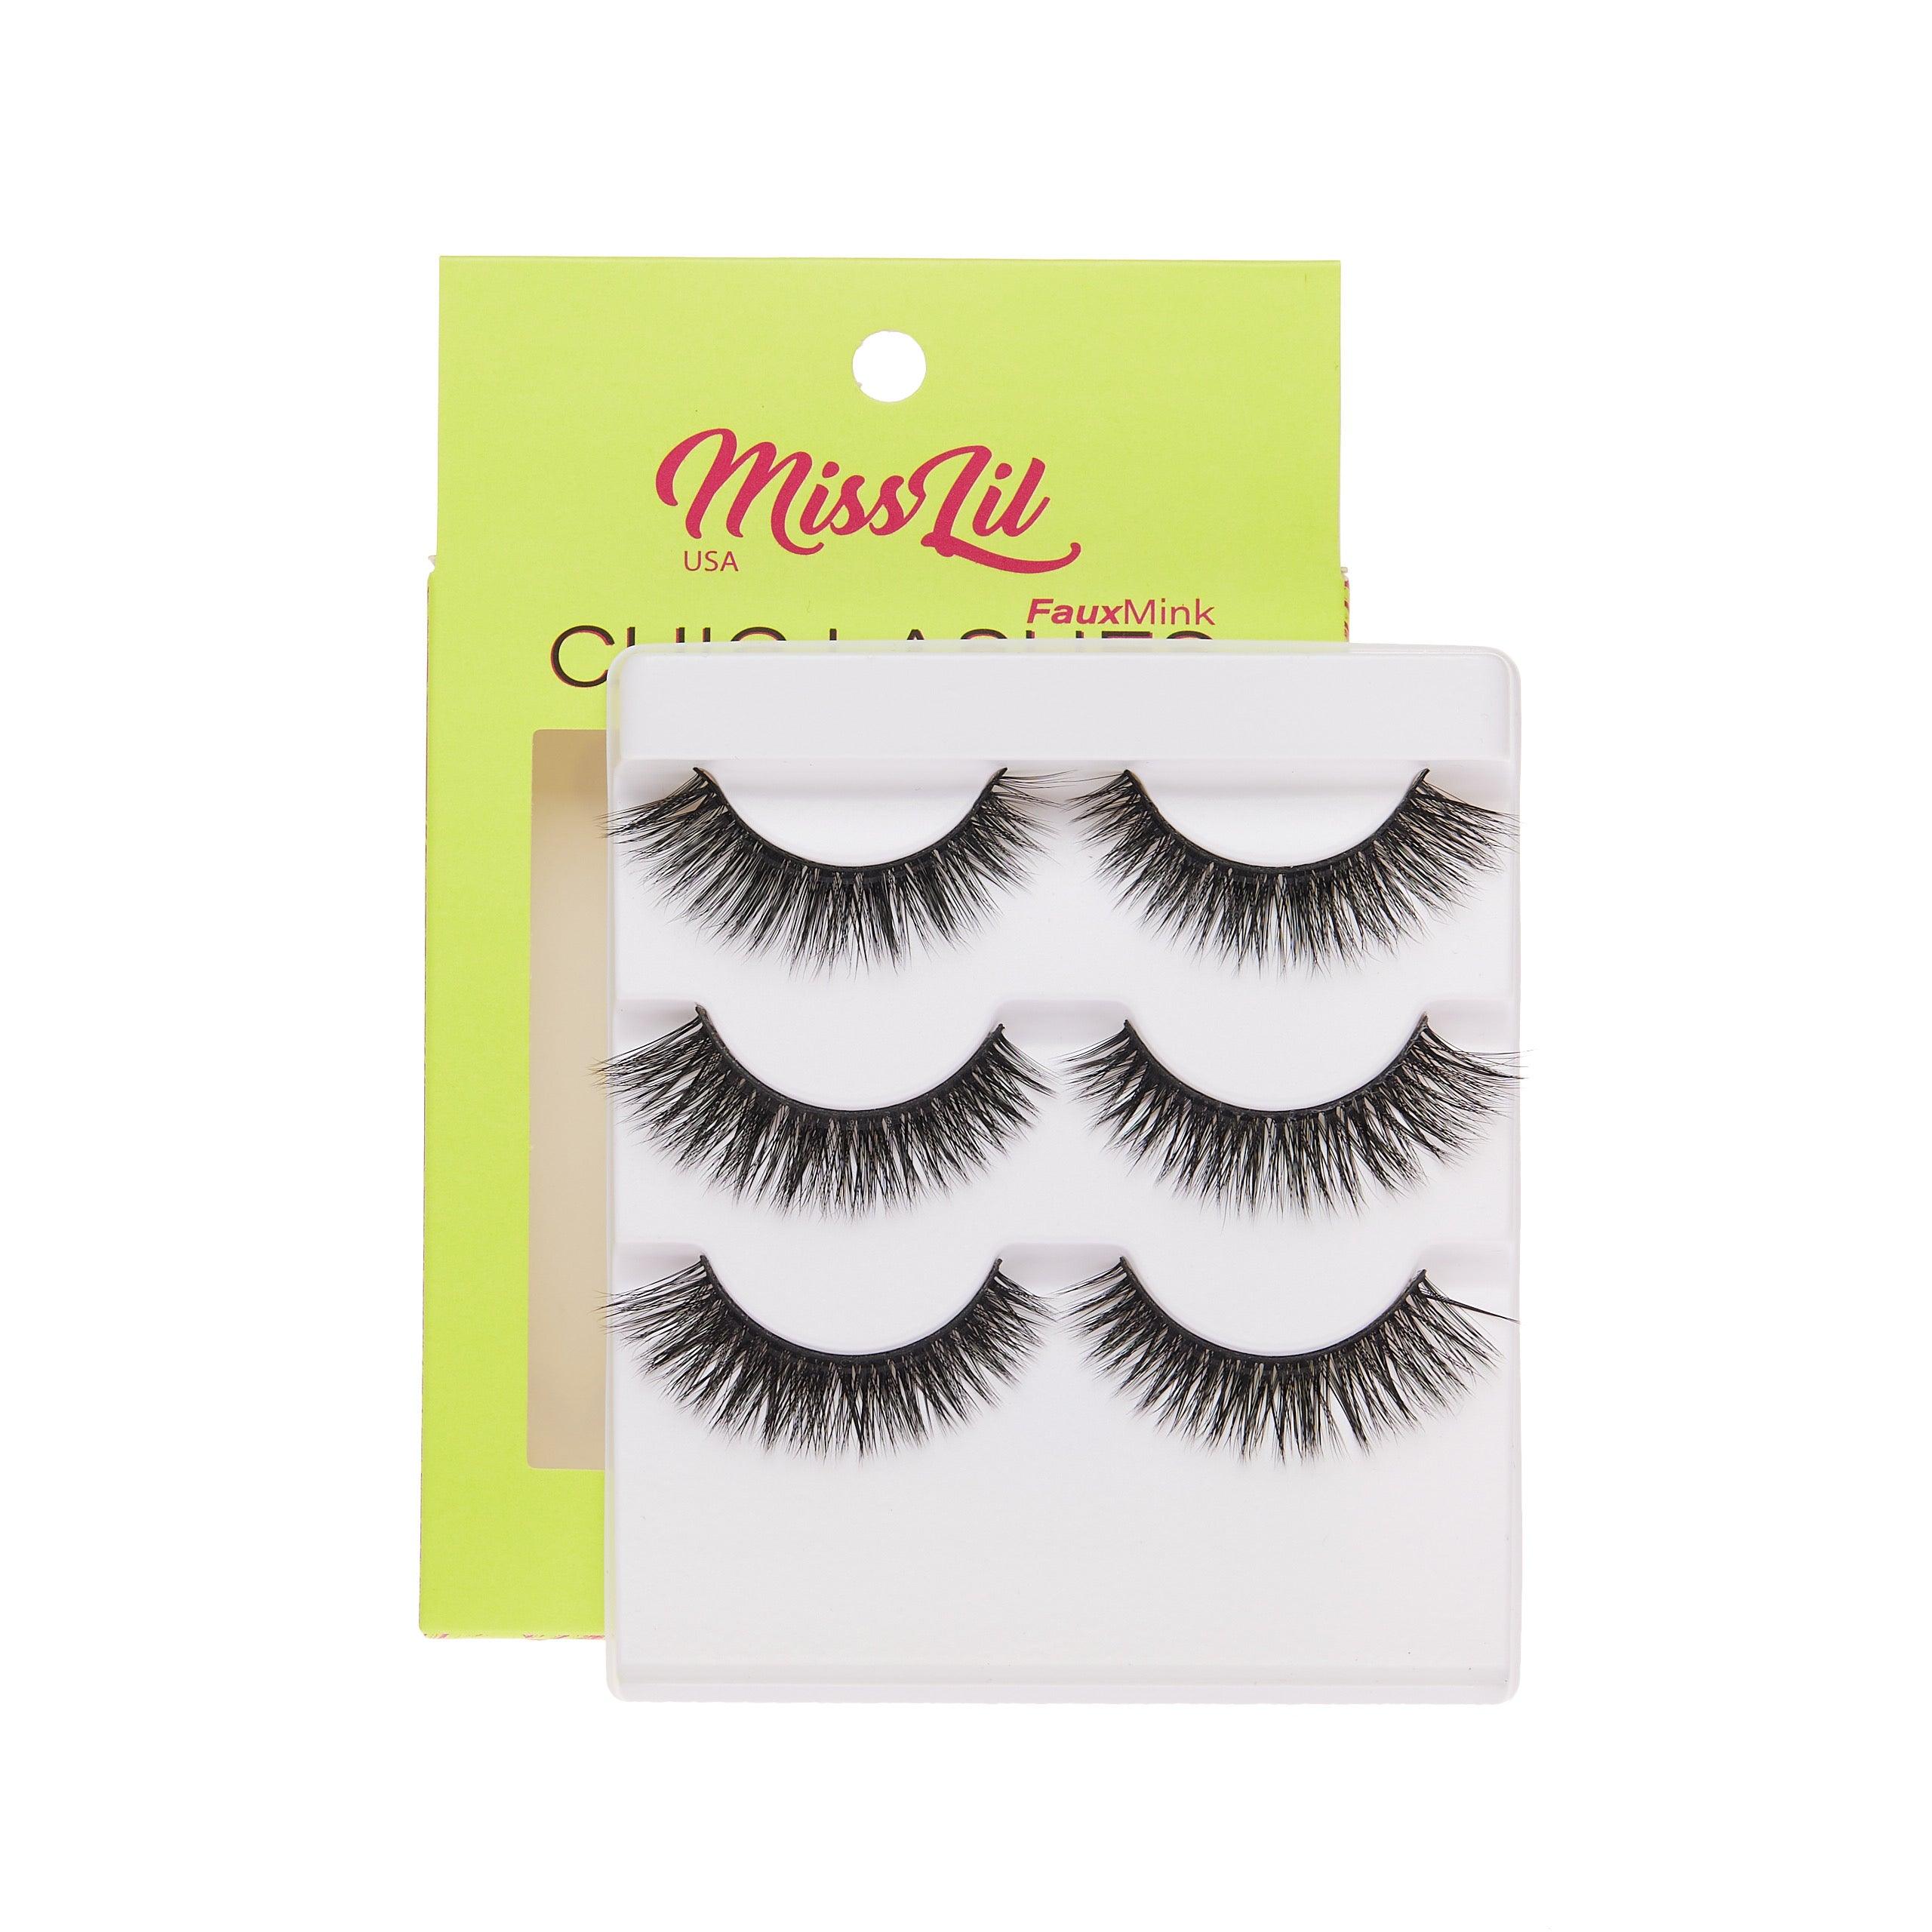 3-Pair Faux Mink Eyelashes - Chic Lashes Collection #10 - Pack of 3 - Miss Lil USA